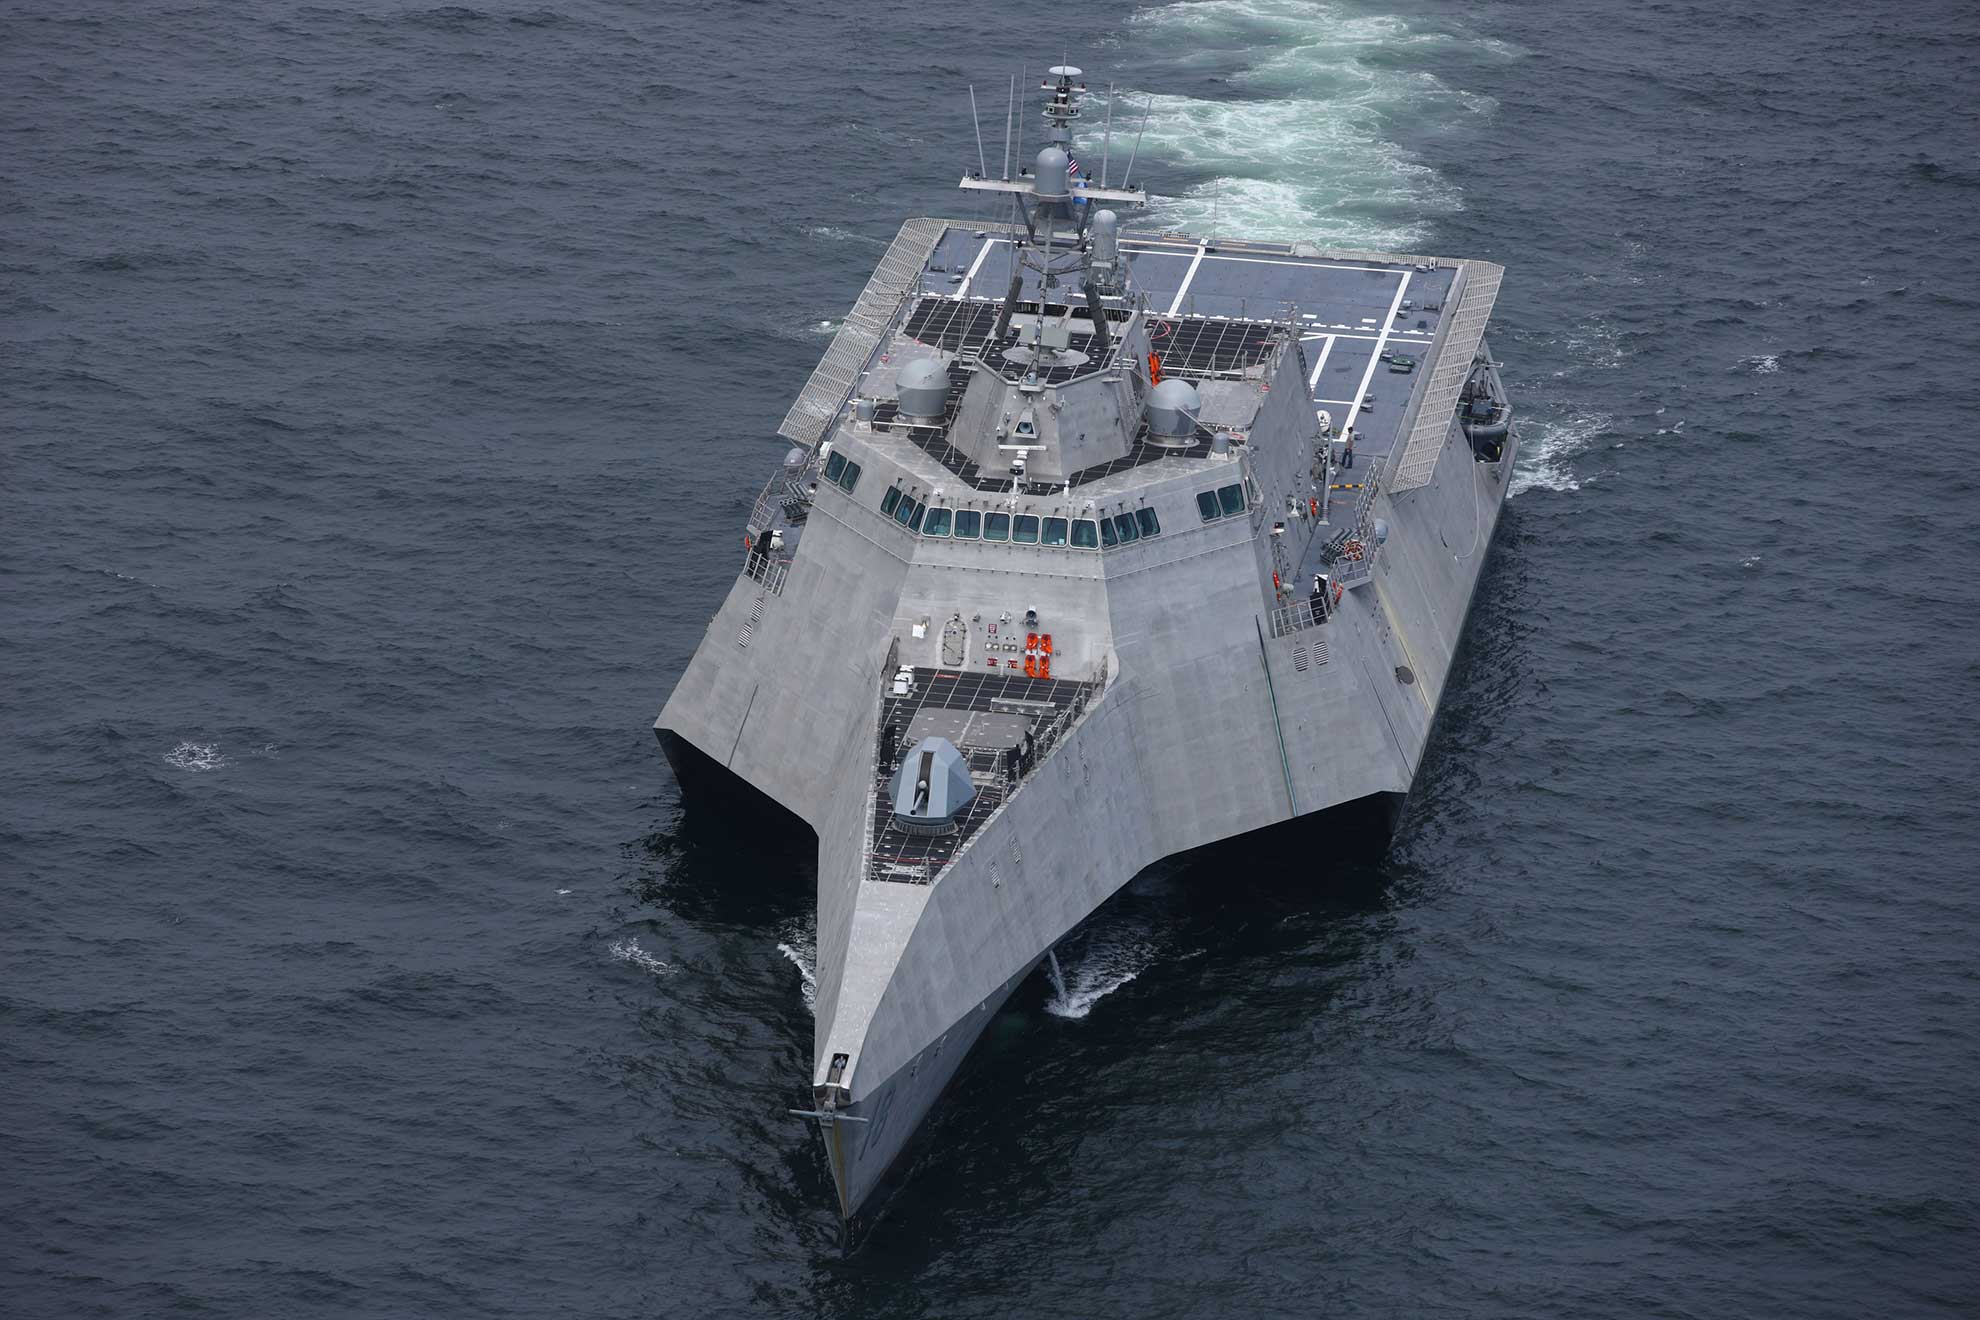 Gulf of Mexico (July 18, 2018) The future littoral combat ship USS Charleston (LCS 18) is underway for acceptance trials, which are the last significant milestone before delivery of the ship to the Navy. The Independence-variant littoral combat ship will be commissioned March 2 in Charleston, South Carolina -- U.S. Navy photo courtesy of Austal US. -